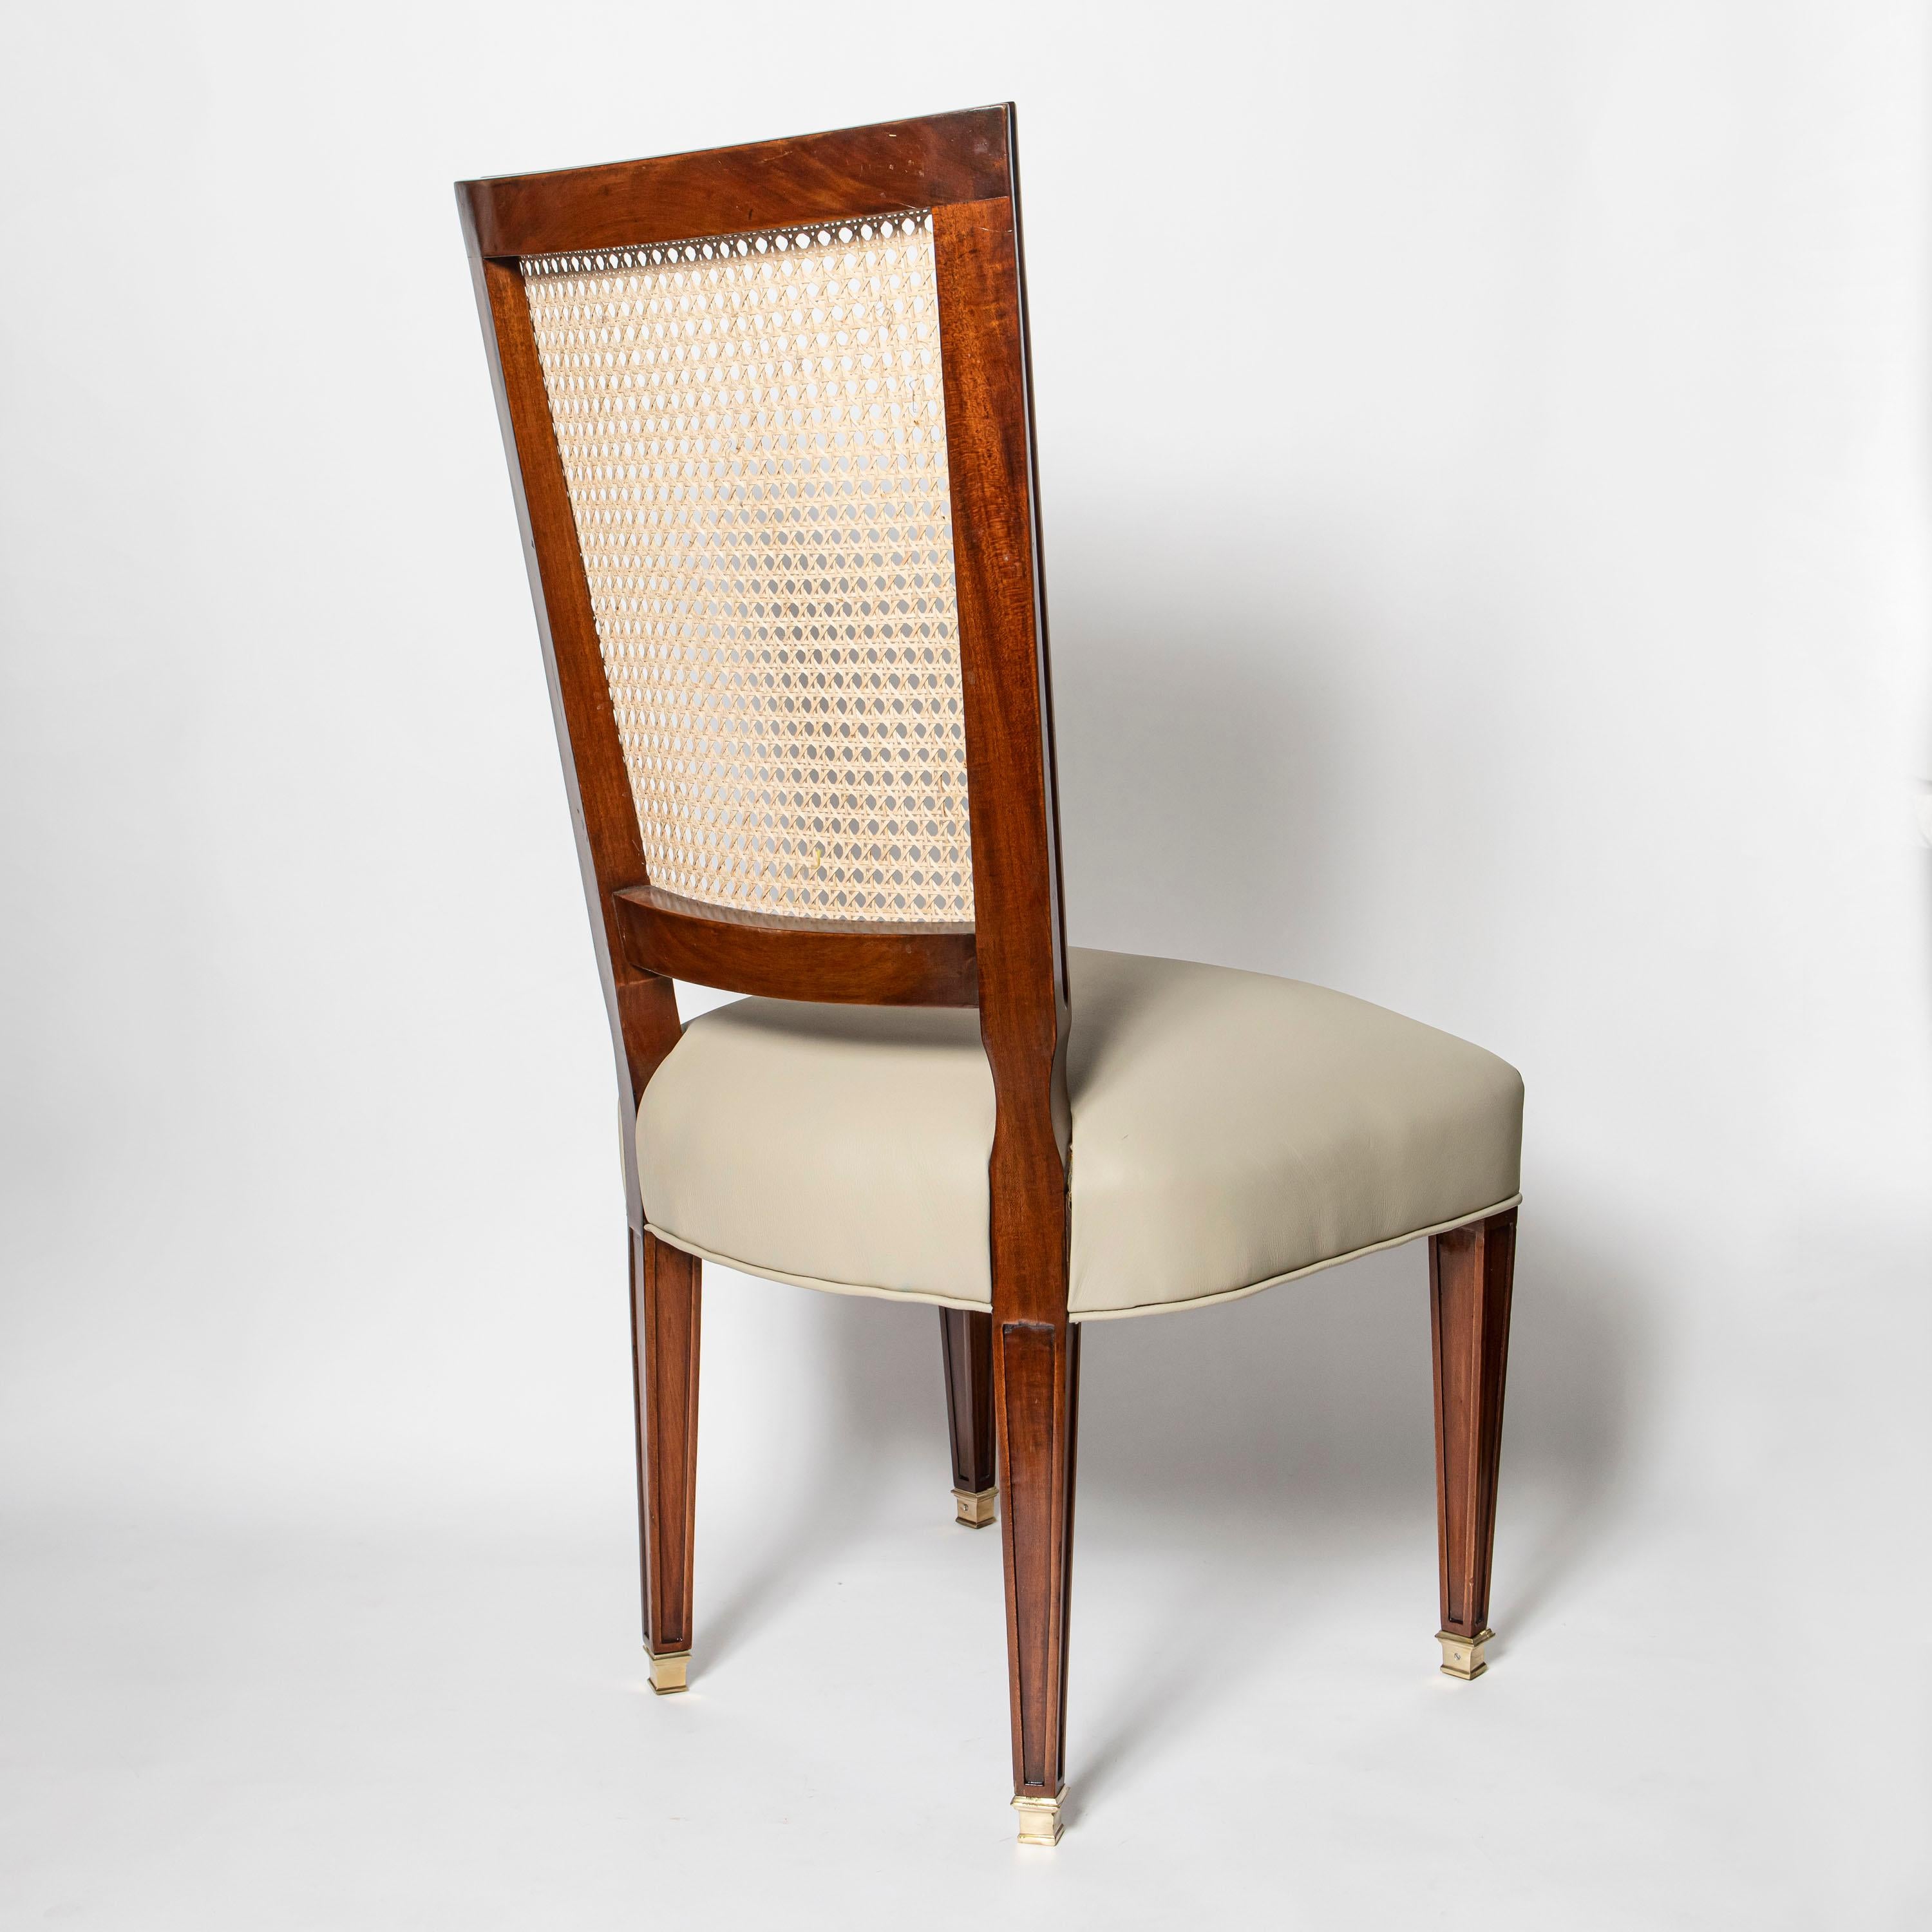 Set of Eight Wood, Rattan and Leather Chairs by Casa Comte, Argentina, 1940 In Good Condition For Sale In Buenos Aires, Buenos Aires